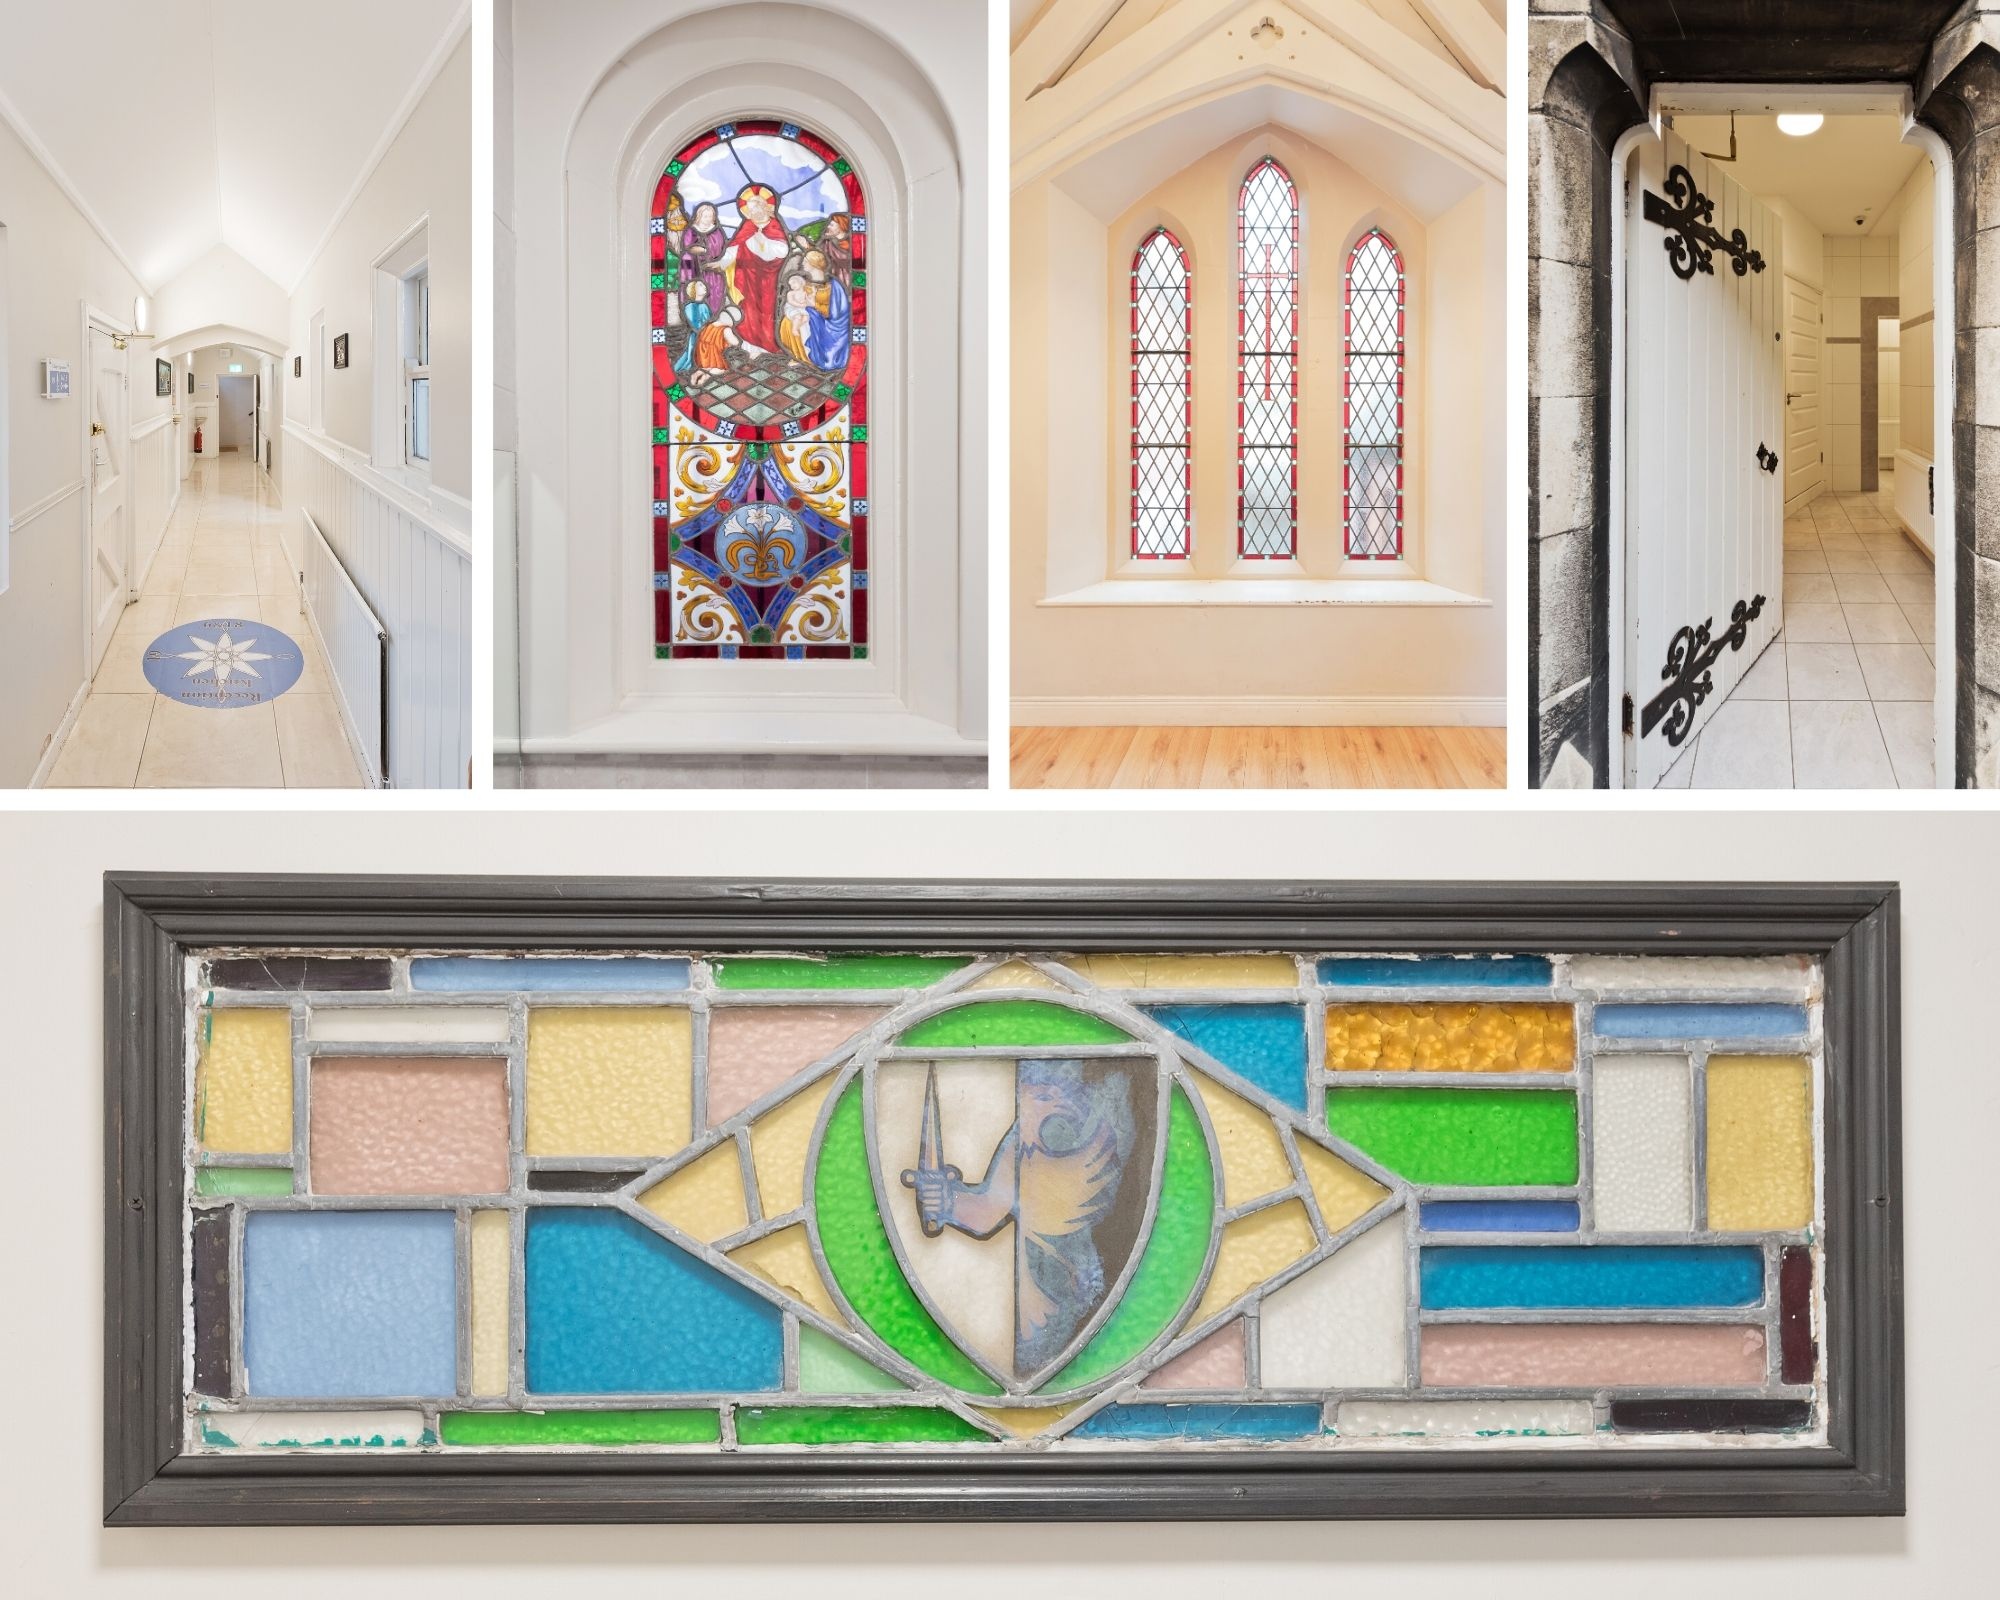 Original details and stained glasses kept for the Chapel Experience at the Gardiner House Hostel